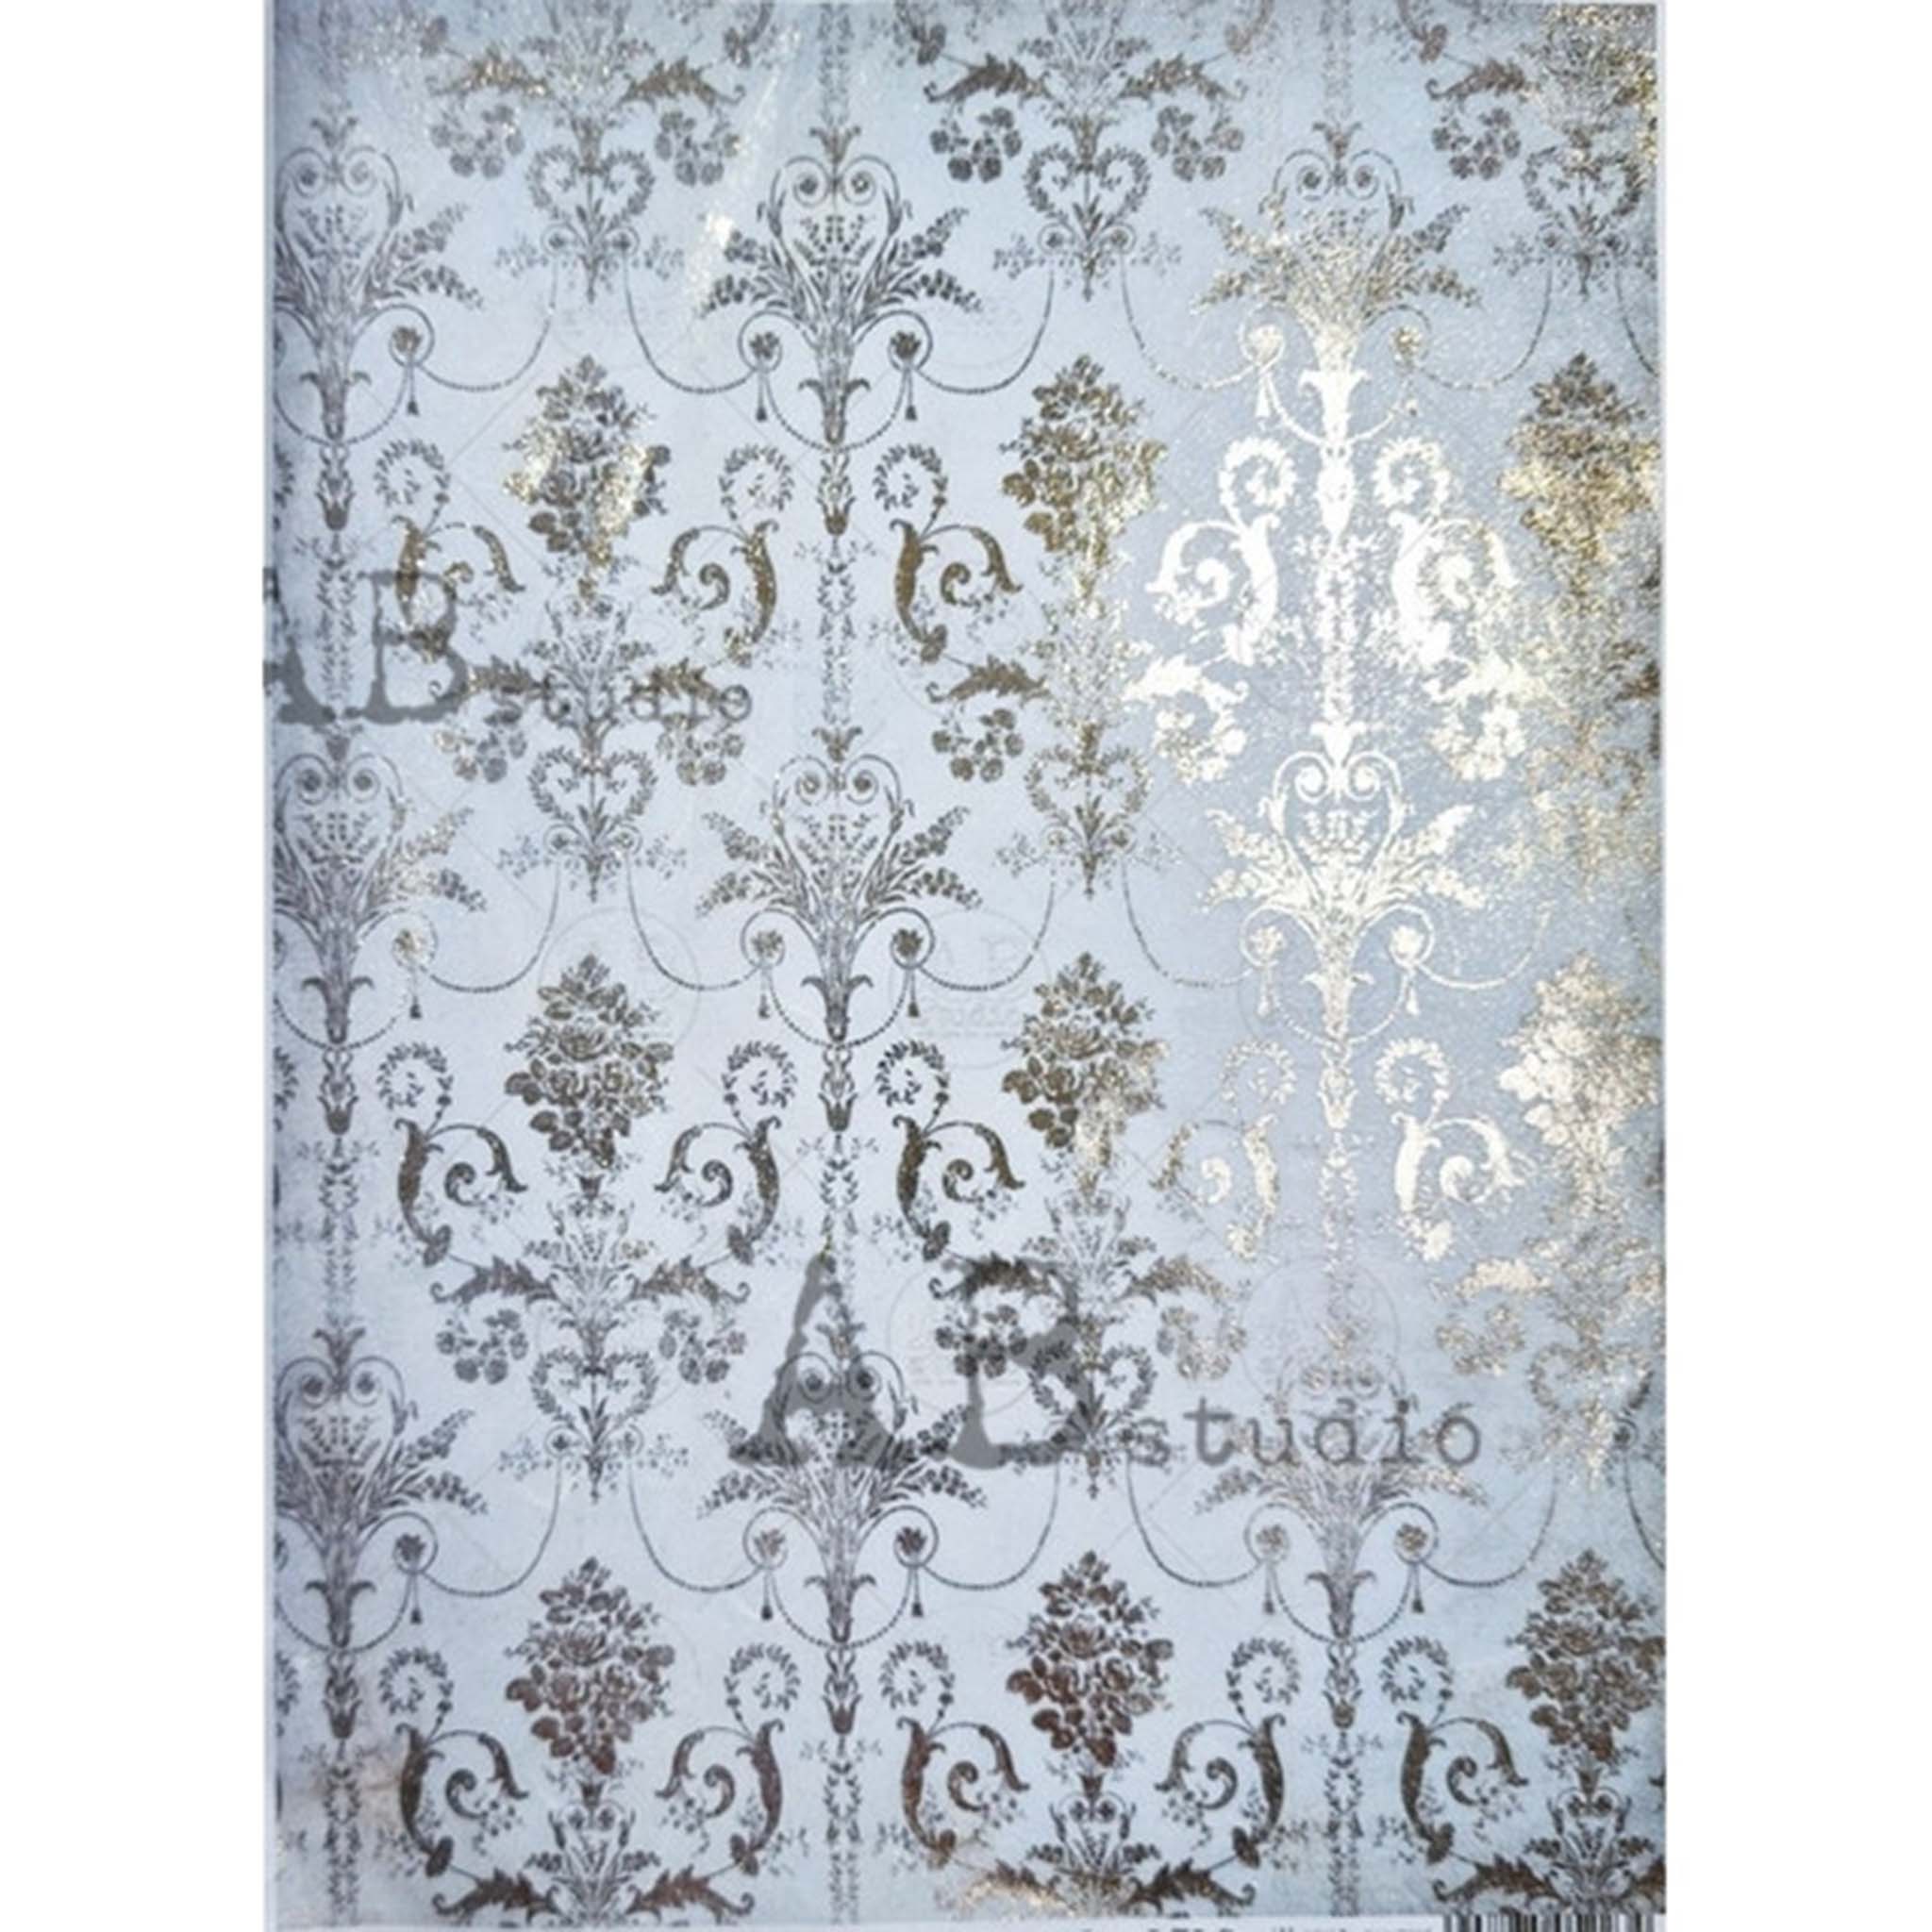 A4 rice paper that features a silver gilded baroque pattern against a light blue background. White borders are on the sides.